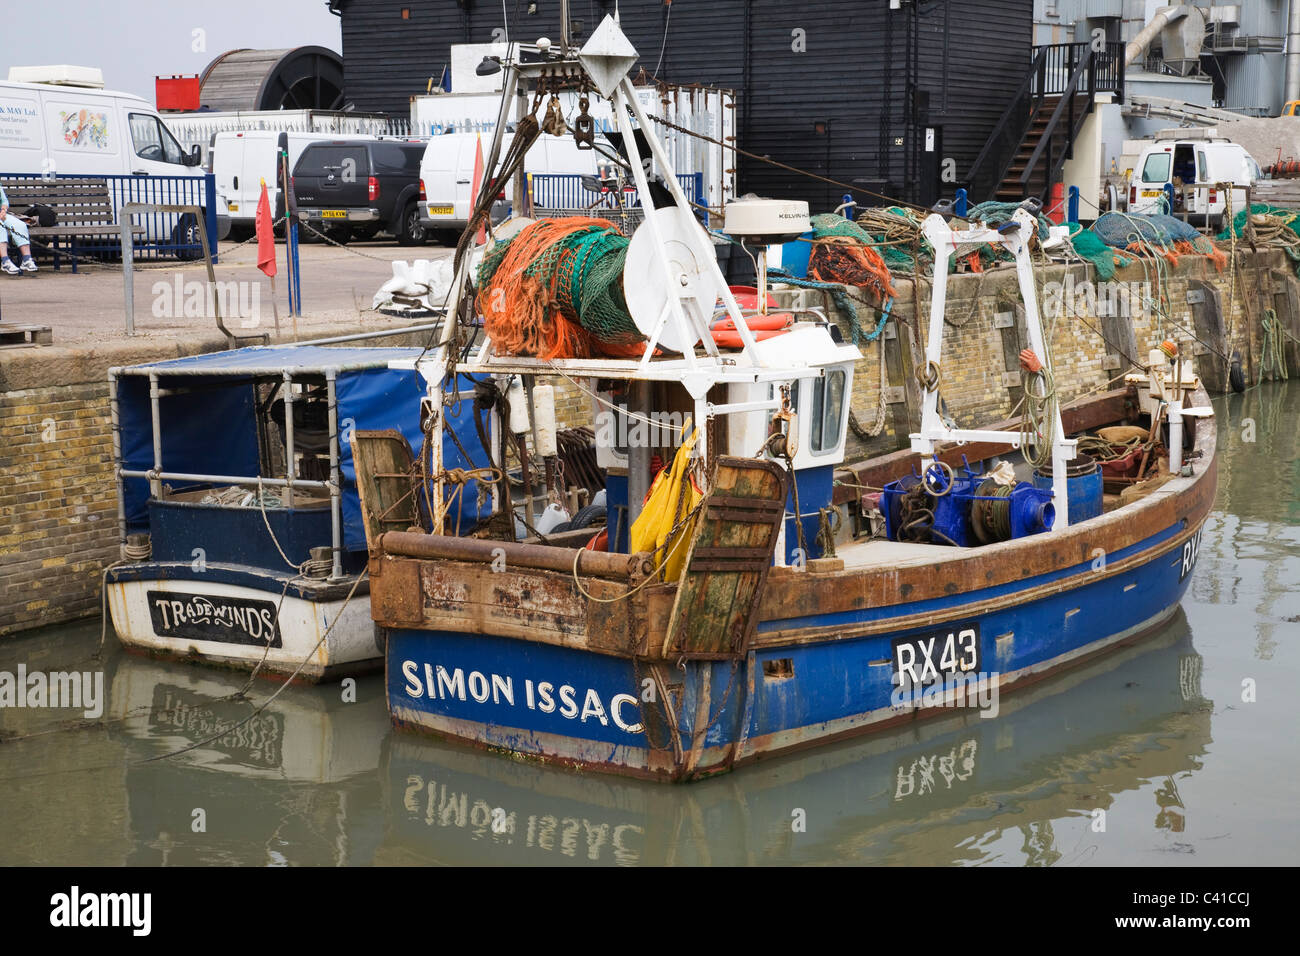 Two fishing boats moored in Whitstable harbour, Kent, England, UK. Stock Photo